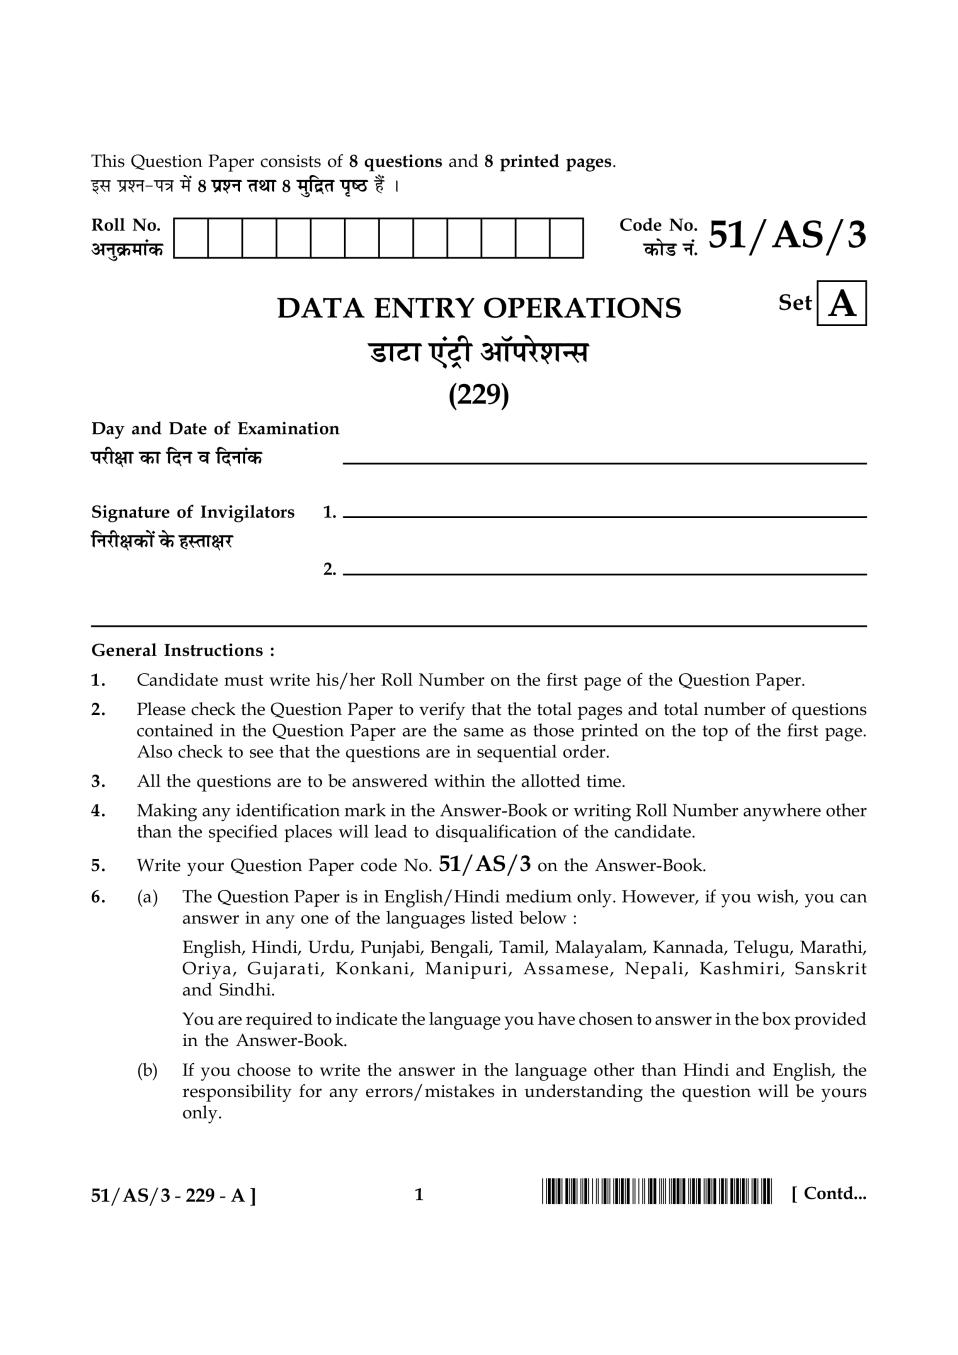 NIOS Class 10 Question Paper Oct 2015 - Data Entry Operations - Page 1